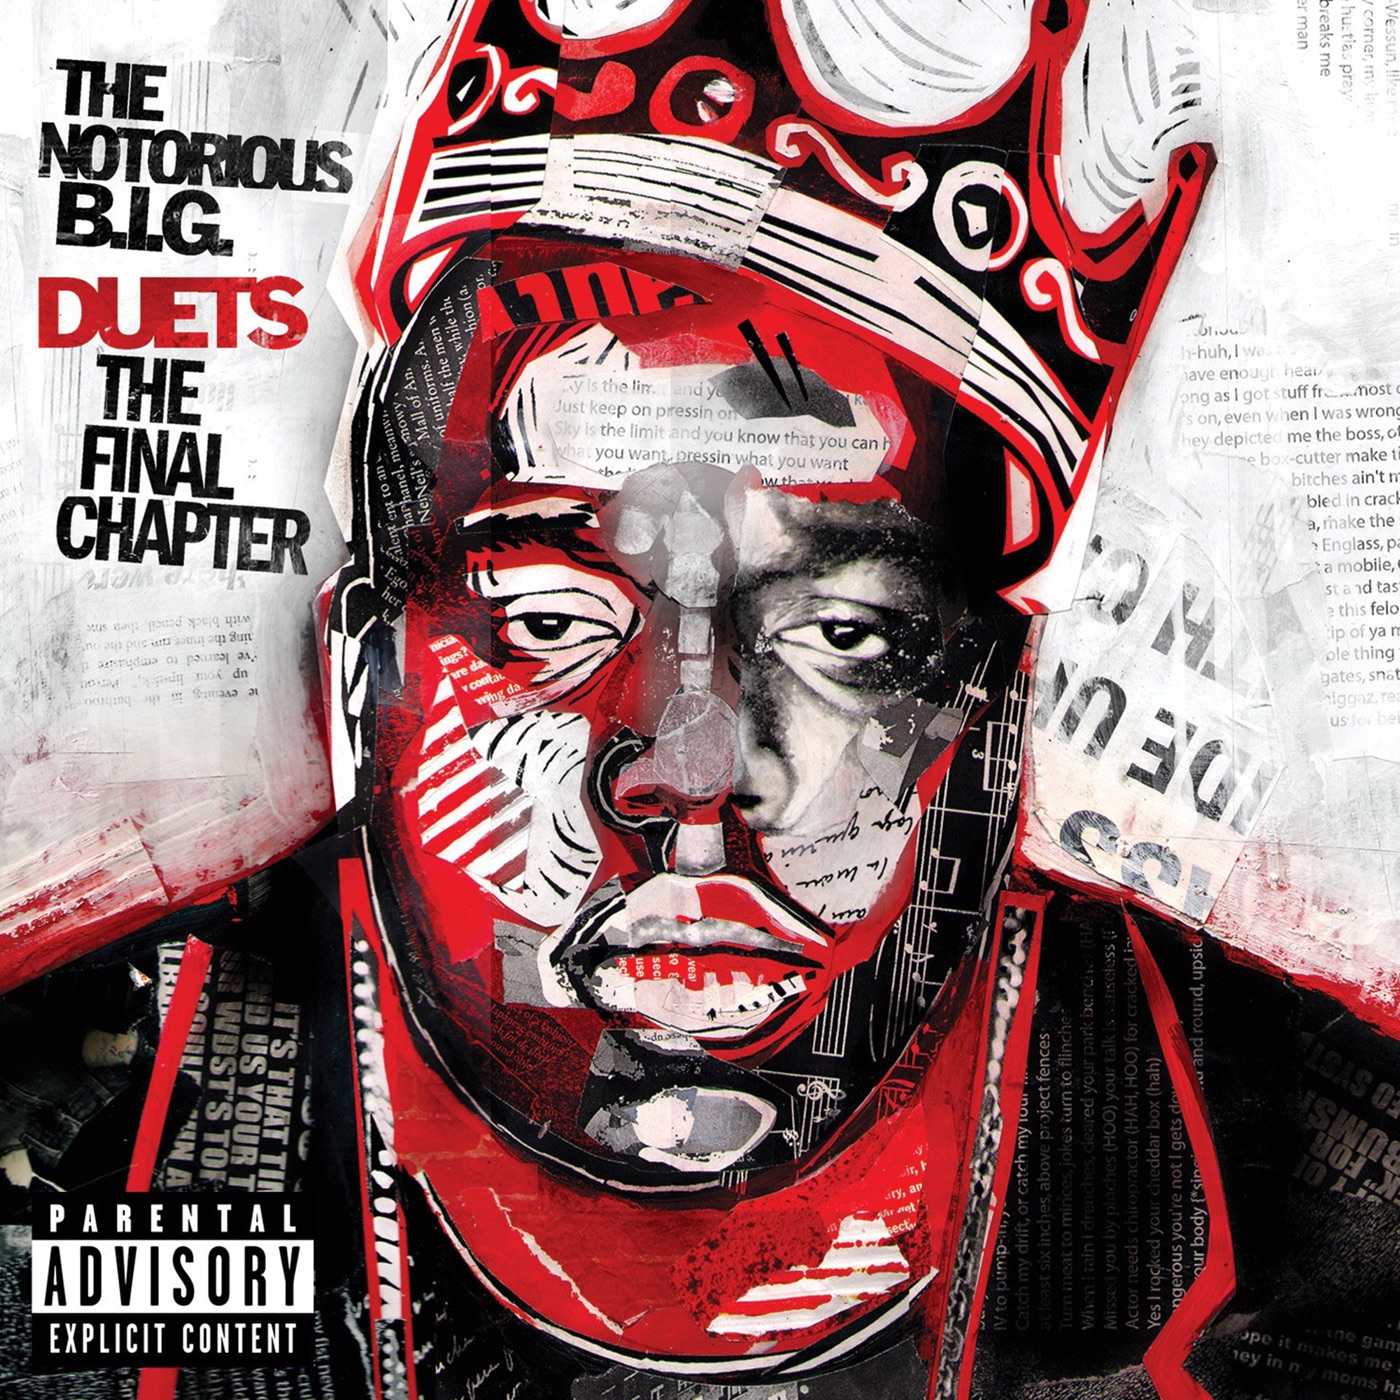 the notorious big album covers